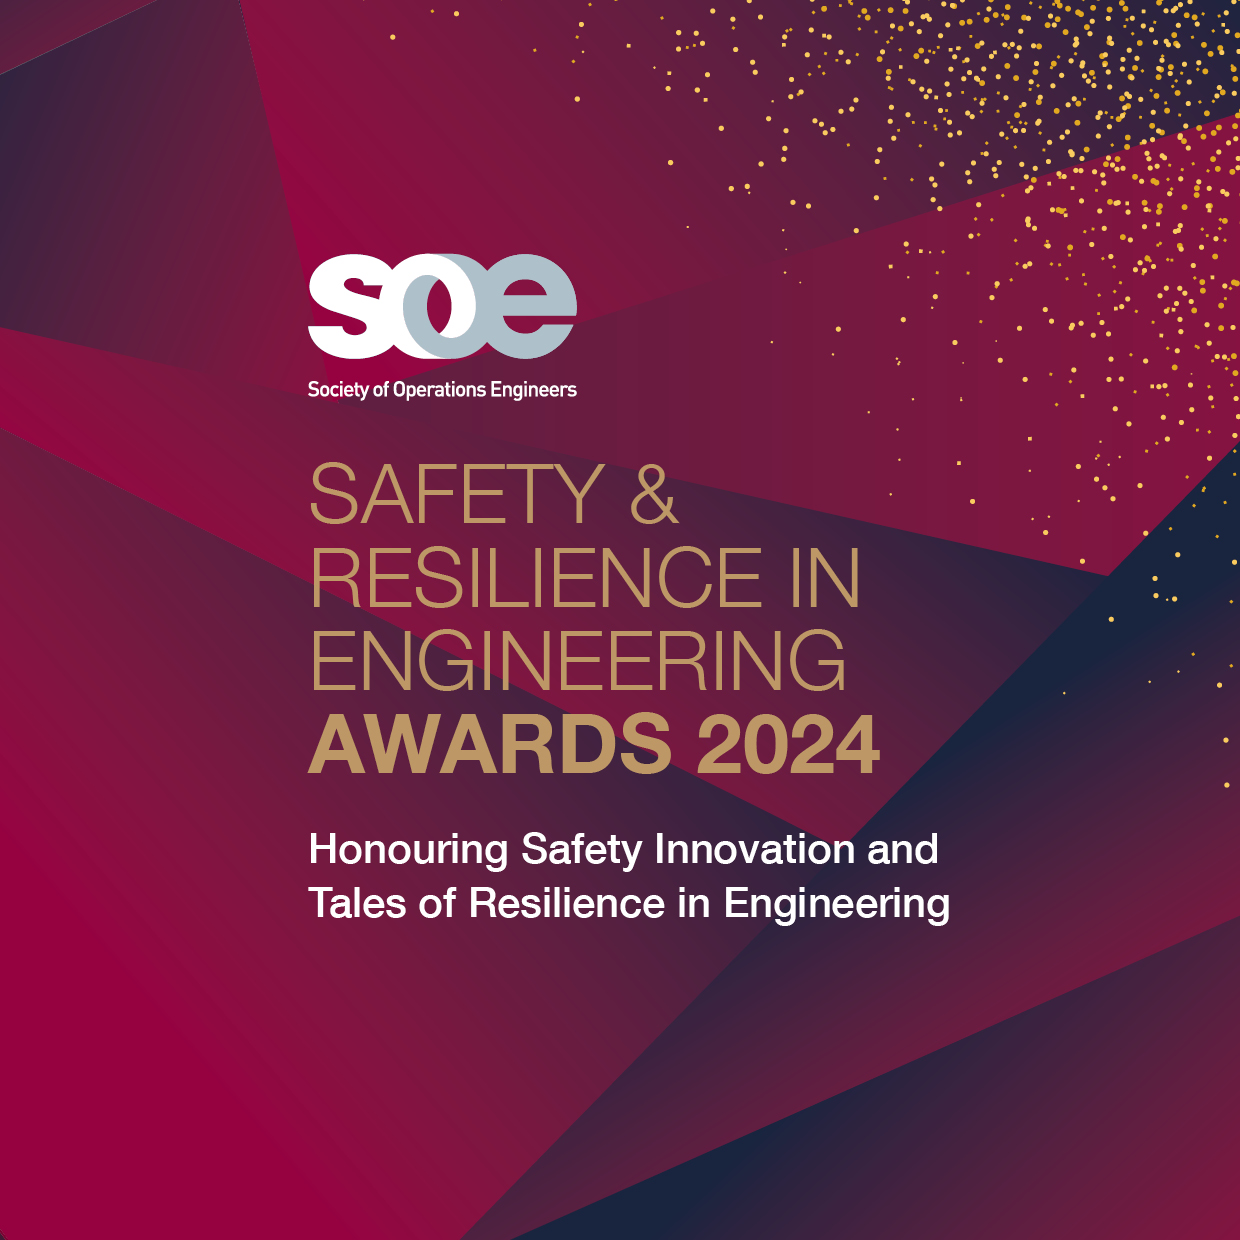 SOE safety awards now open for entries